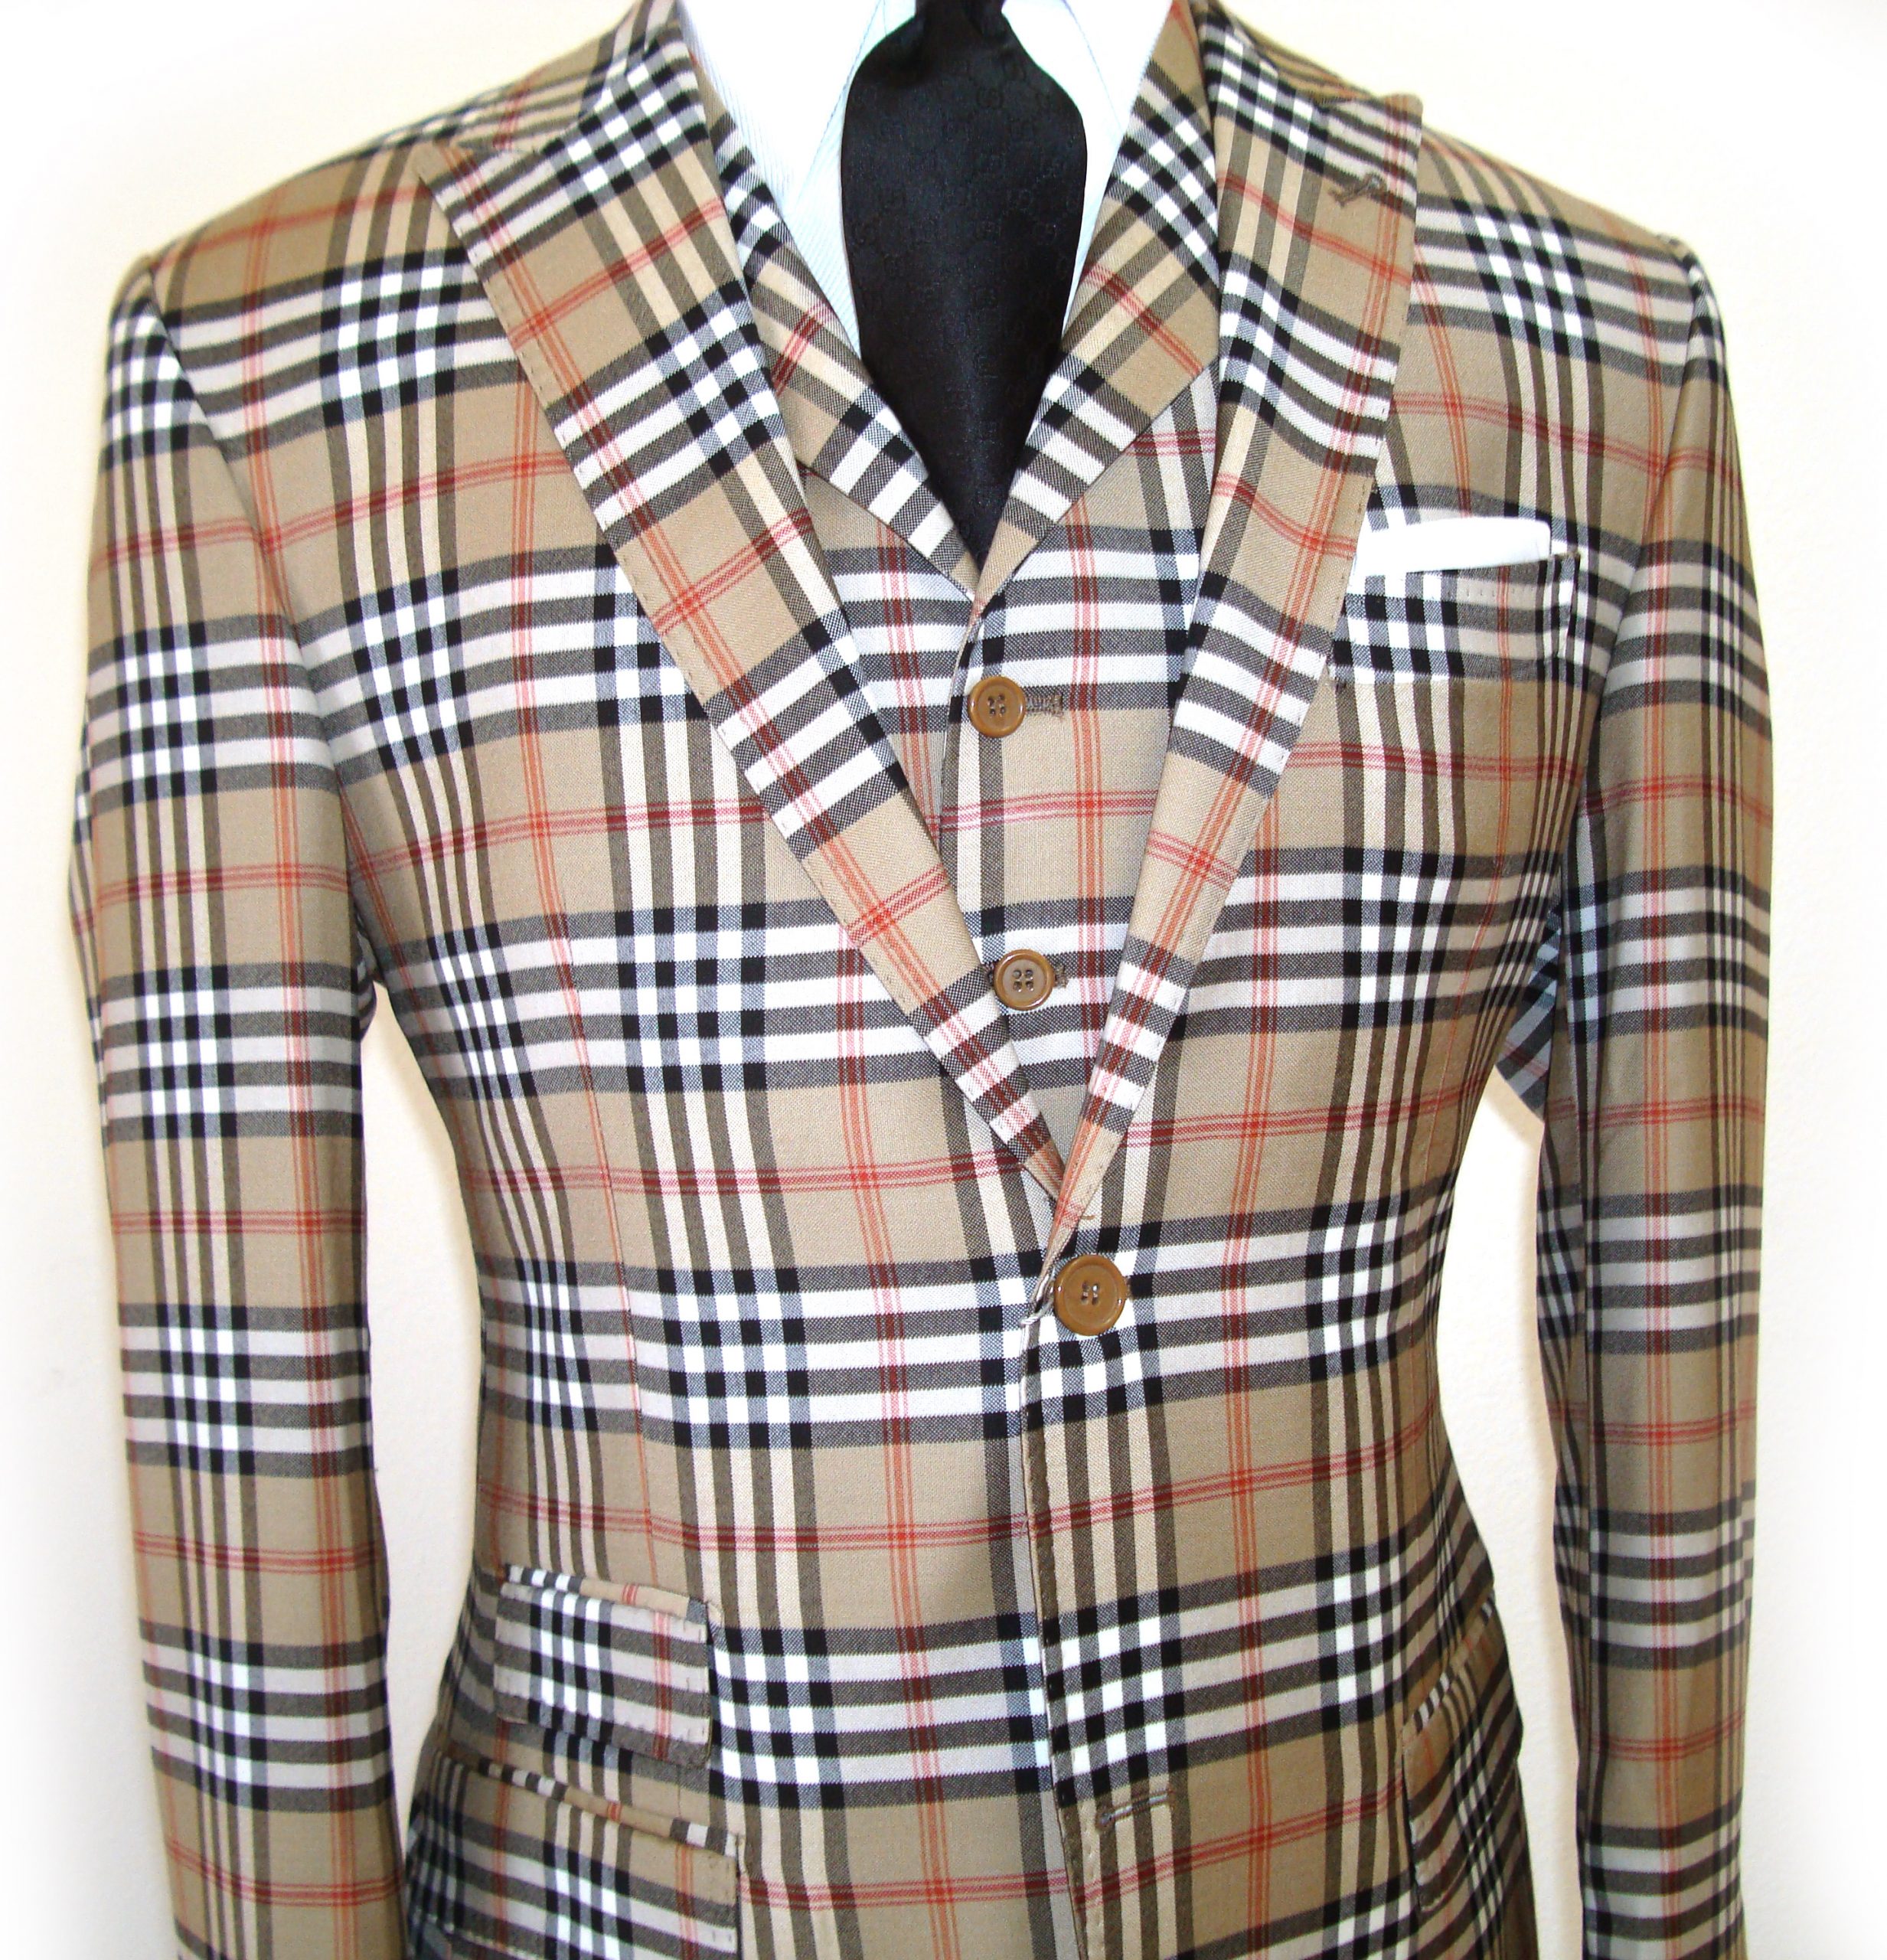 Arriba 61+ imagen how much is a burberry suit